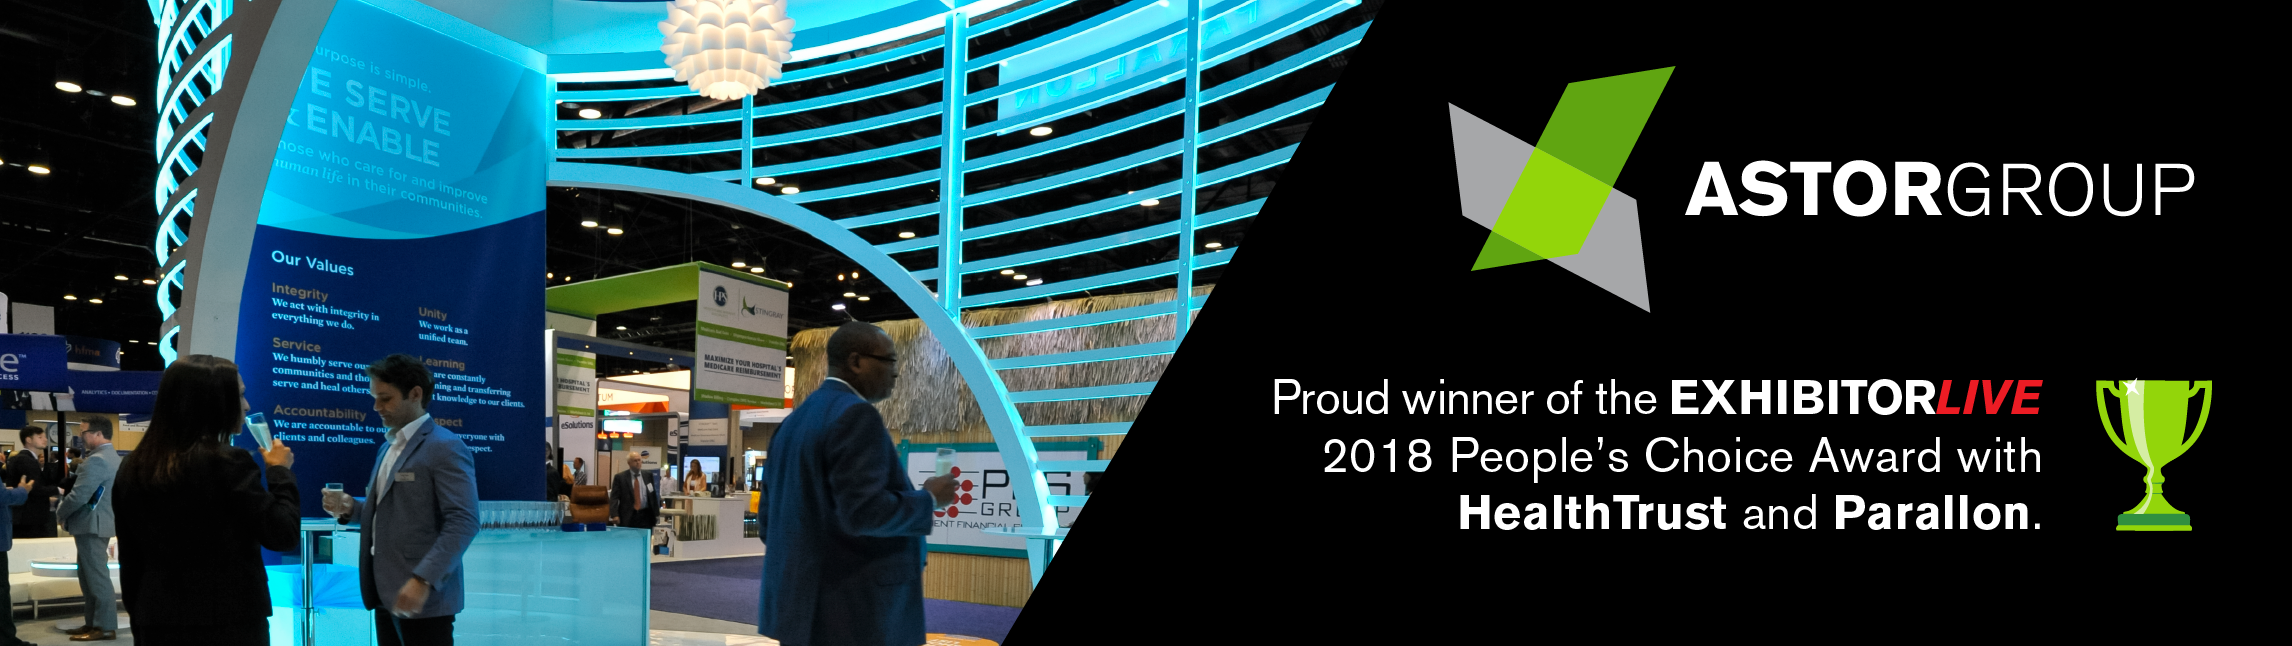 Astor Group: Proud winners of the EXHIBITORLIVE 2018 People's Choice Award.